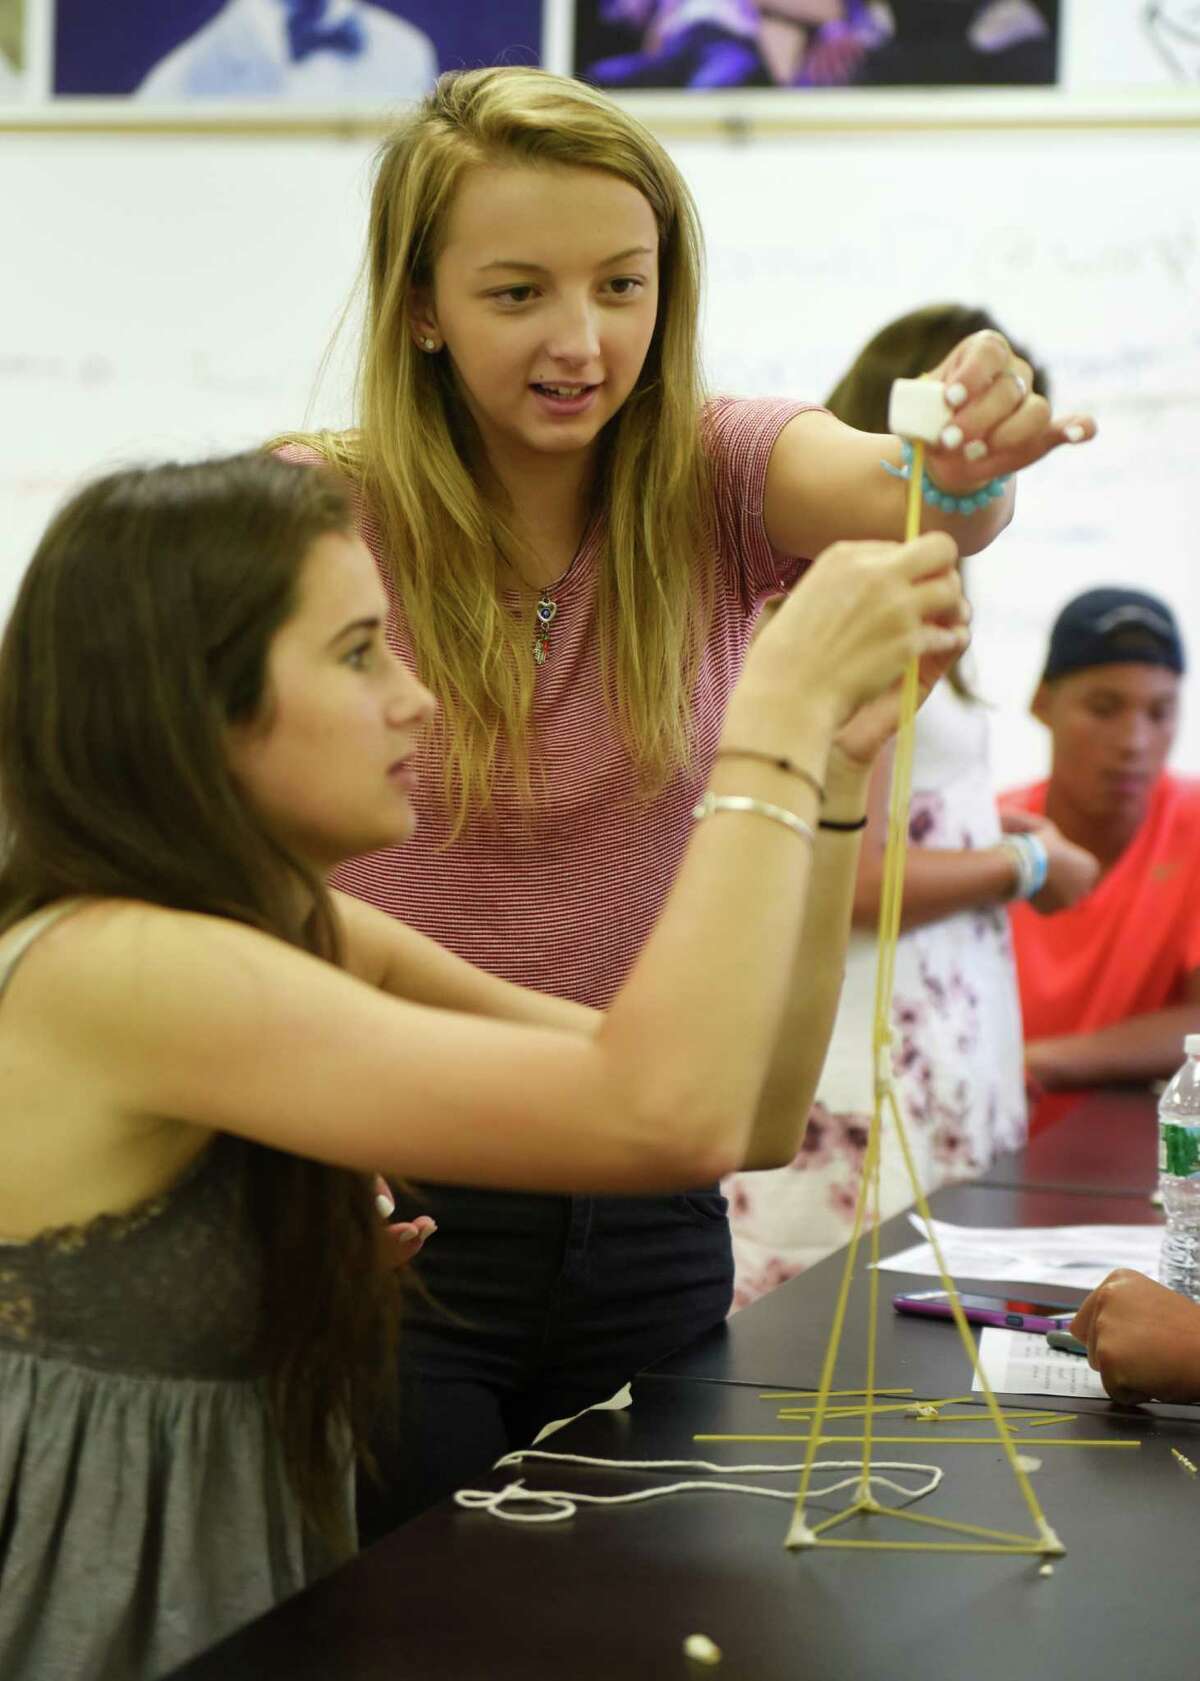 Sophomores Sofia Dodaro, left, and Fjolla Gashi attempt to build a tower out of spaghetti, tape and a single marshmallow during their Innovation Lab class at Greenwich High School in Greenwich, Conn. Thursday, Sept. 3, 2015.